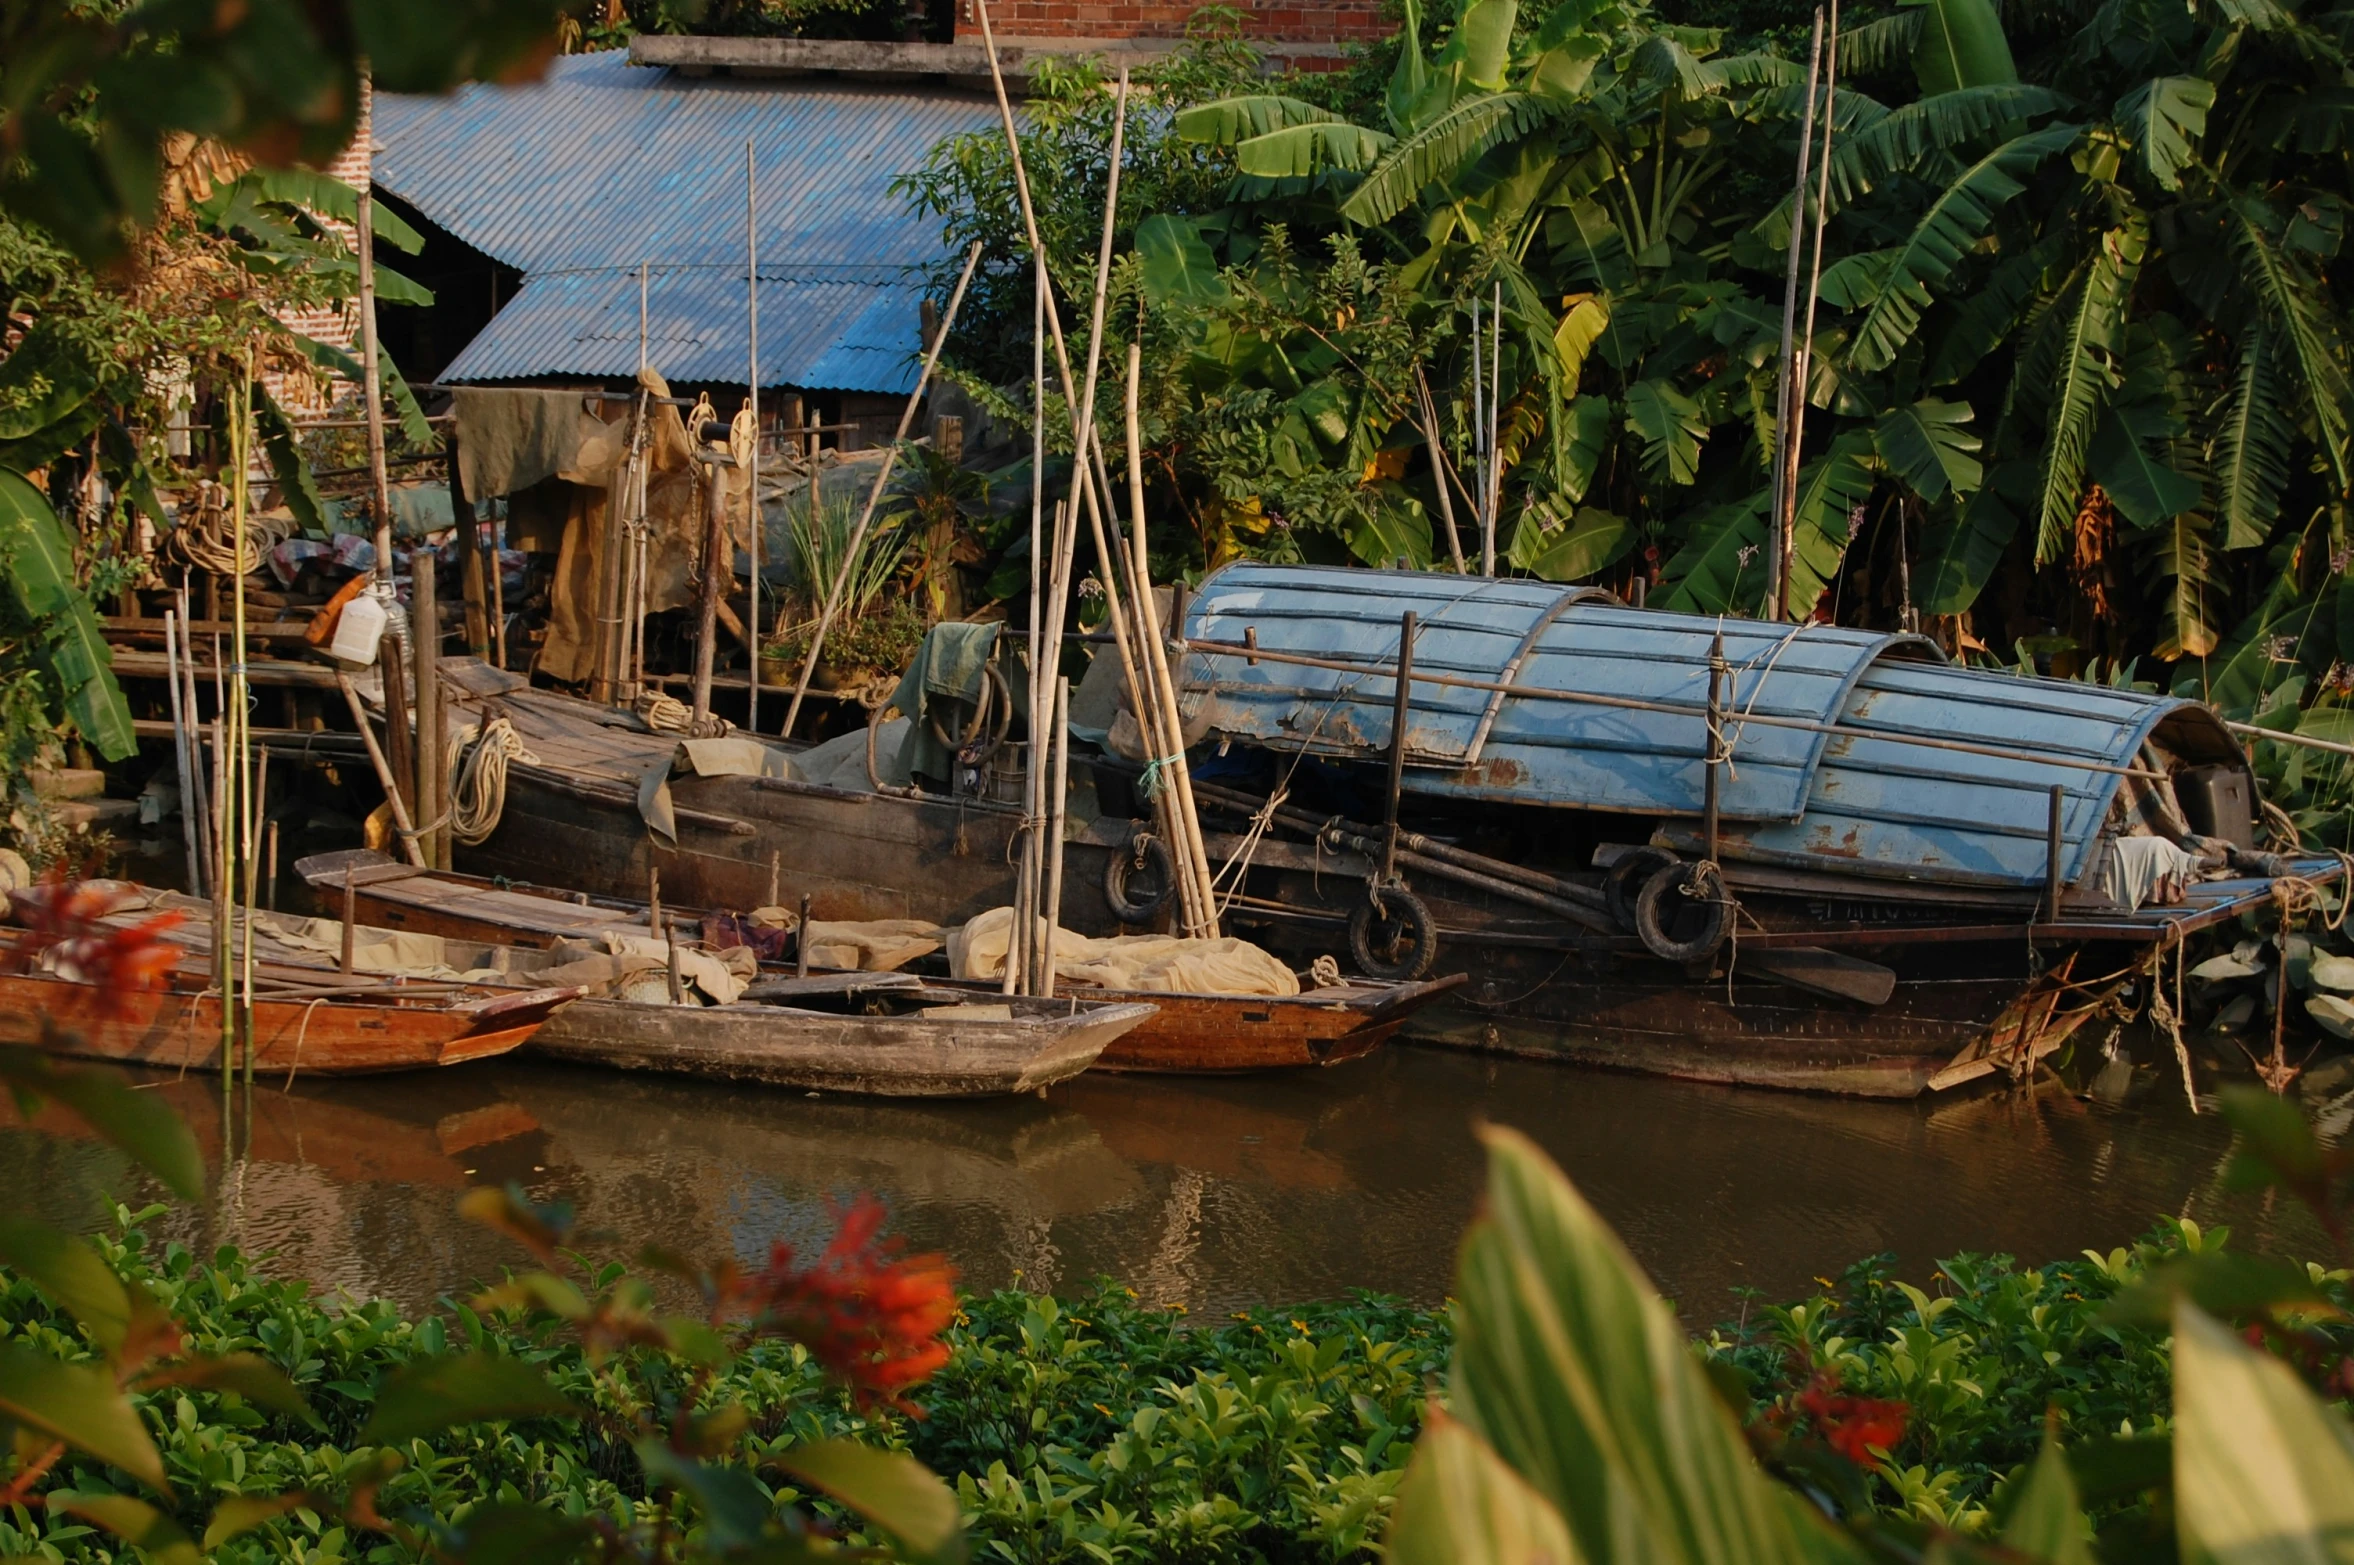 three wooden boats are parked at the edge of the river